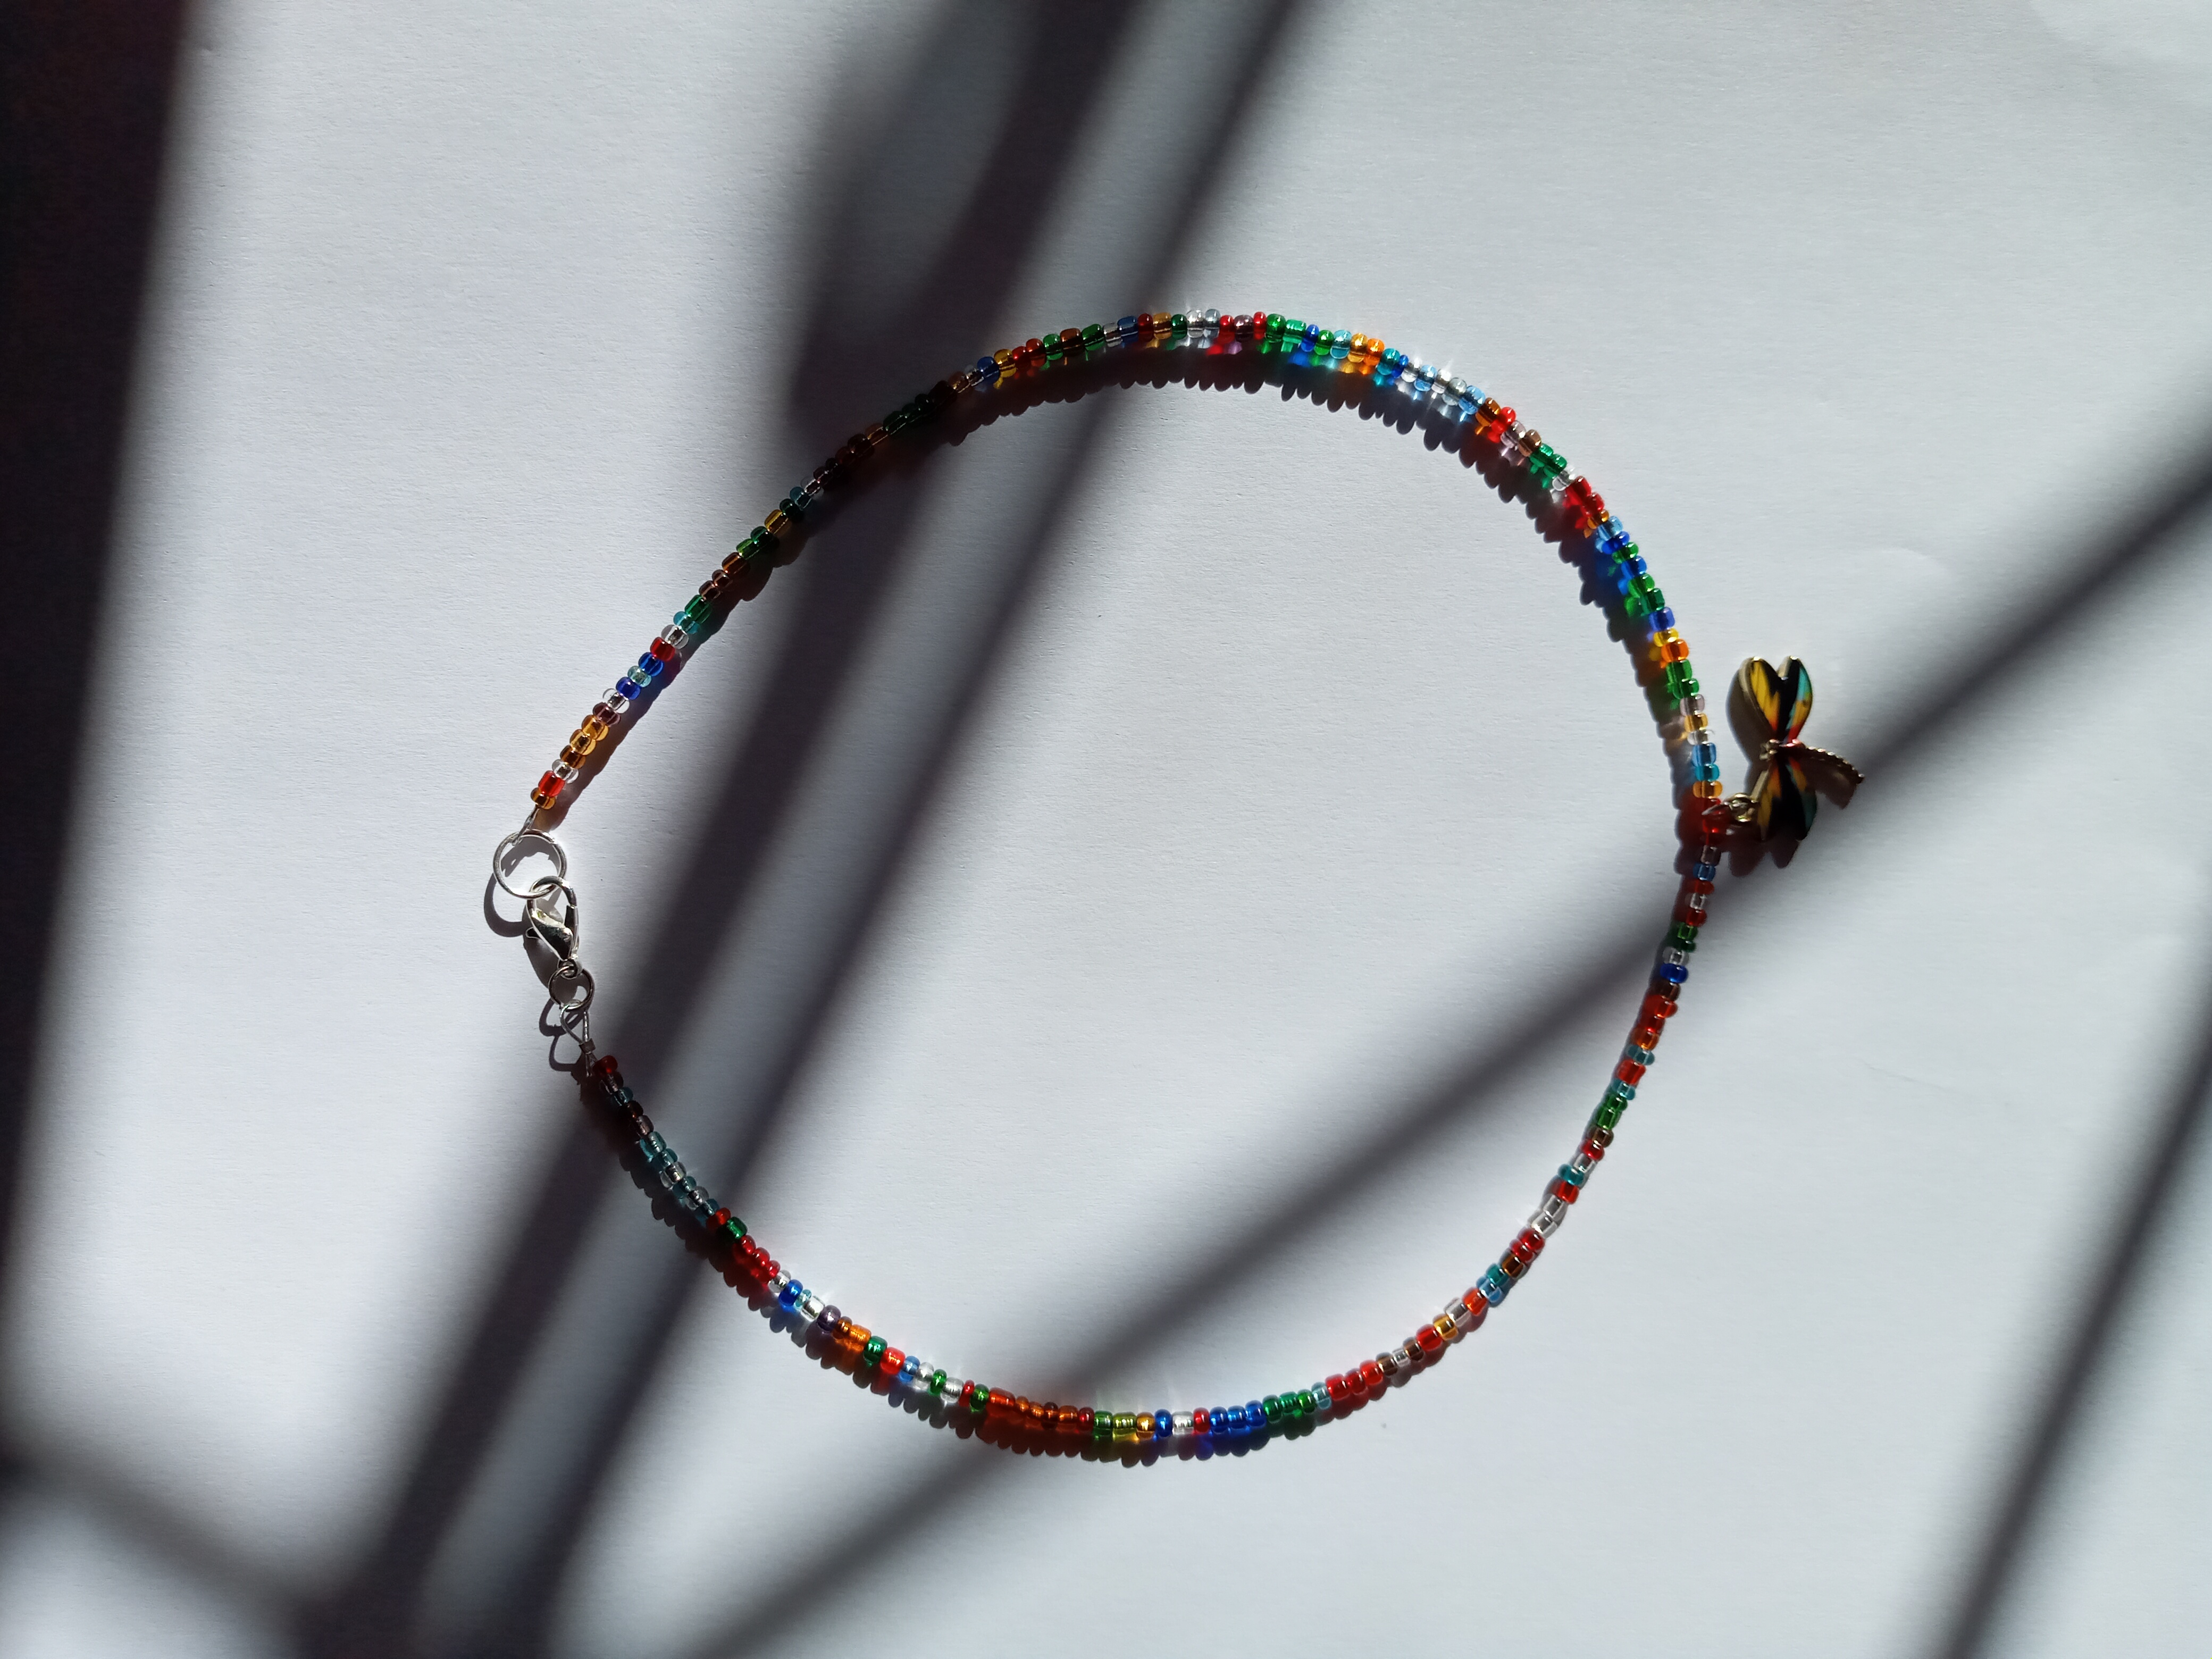 Seed Bead Choker with a dragonfly charm